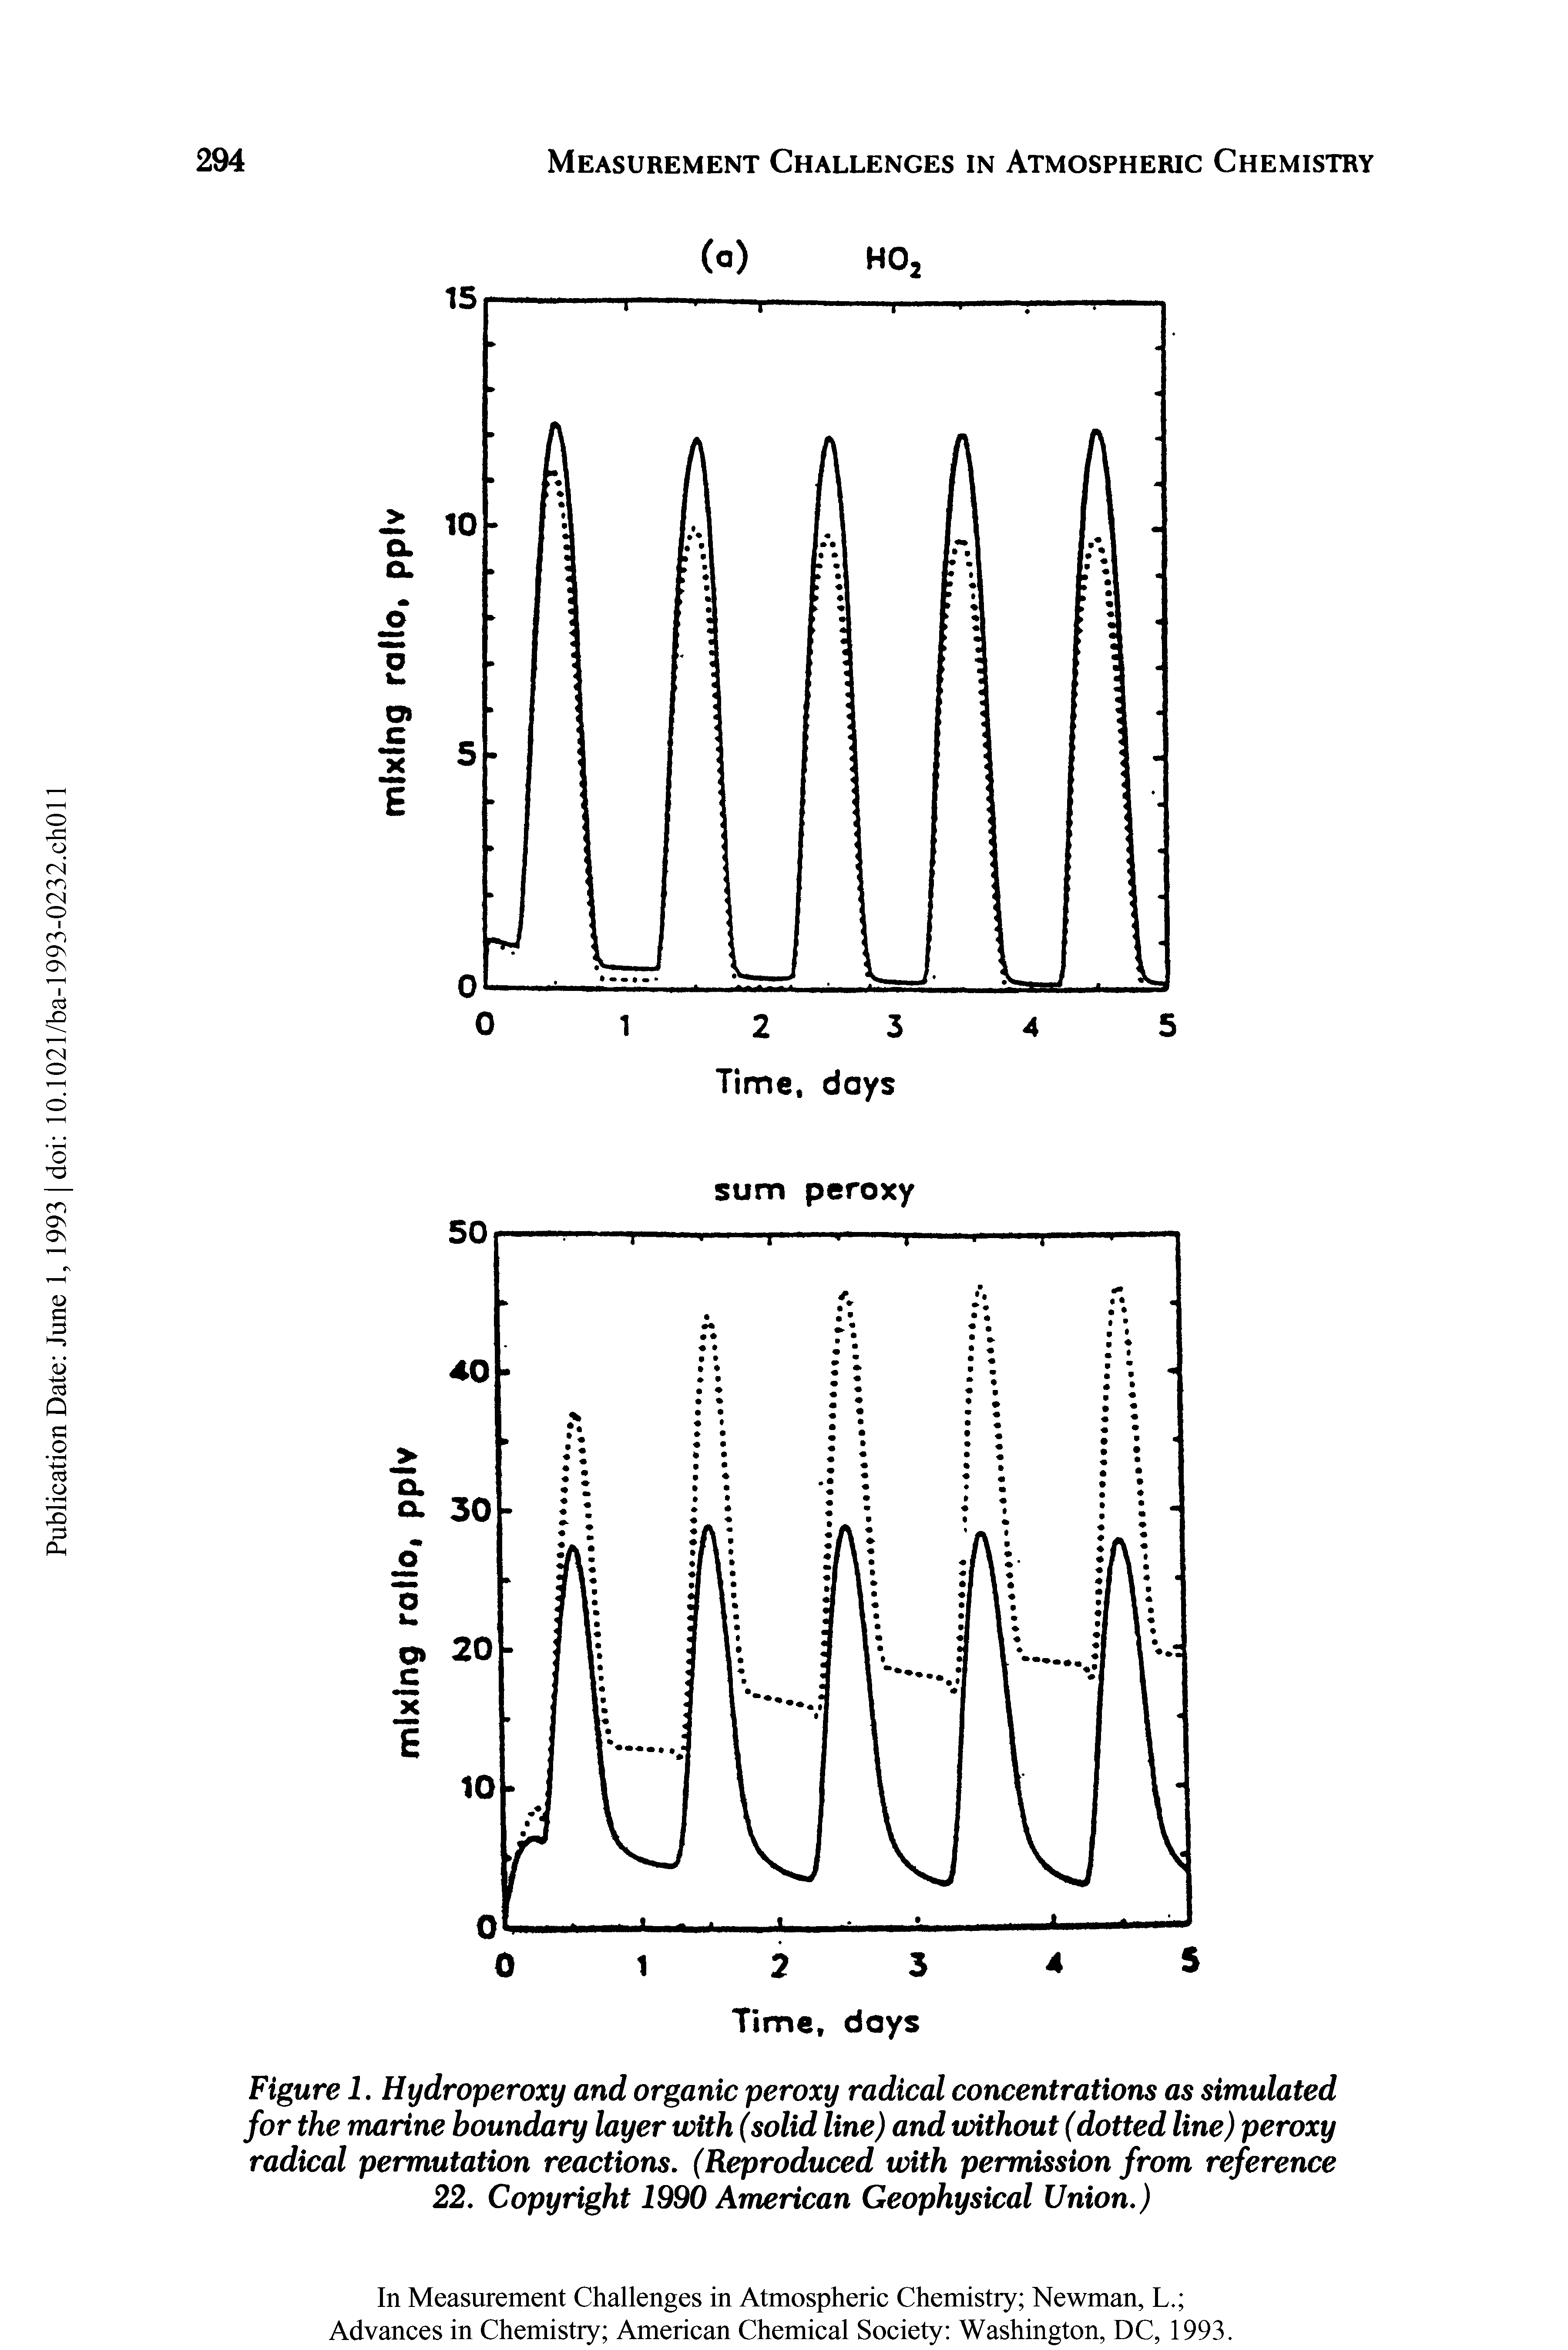 Figure 1. Hydroperoxy and organic peroxy radical concentrations as simulated for the marine boundary layer with (solid line) and without (dotted line) peroxy radical permutation reactions. (Reproduced with permission from reference 22. Copyright 1990 American Geophysical Union.)...